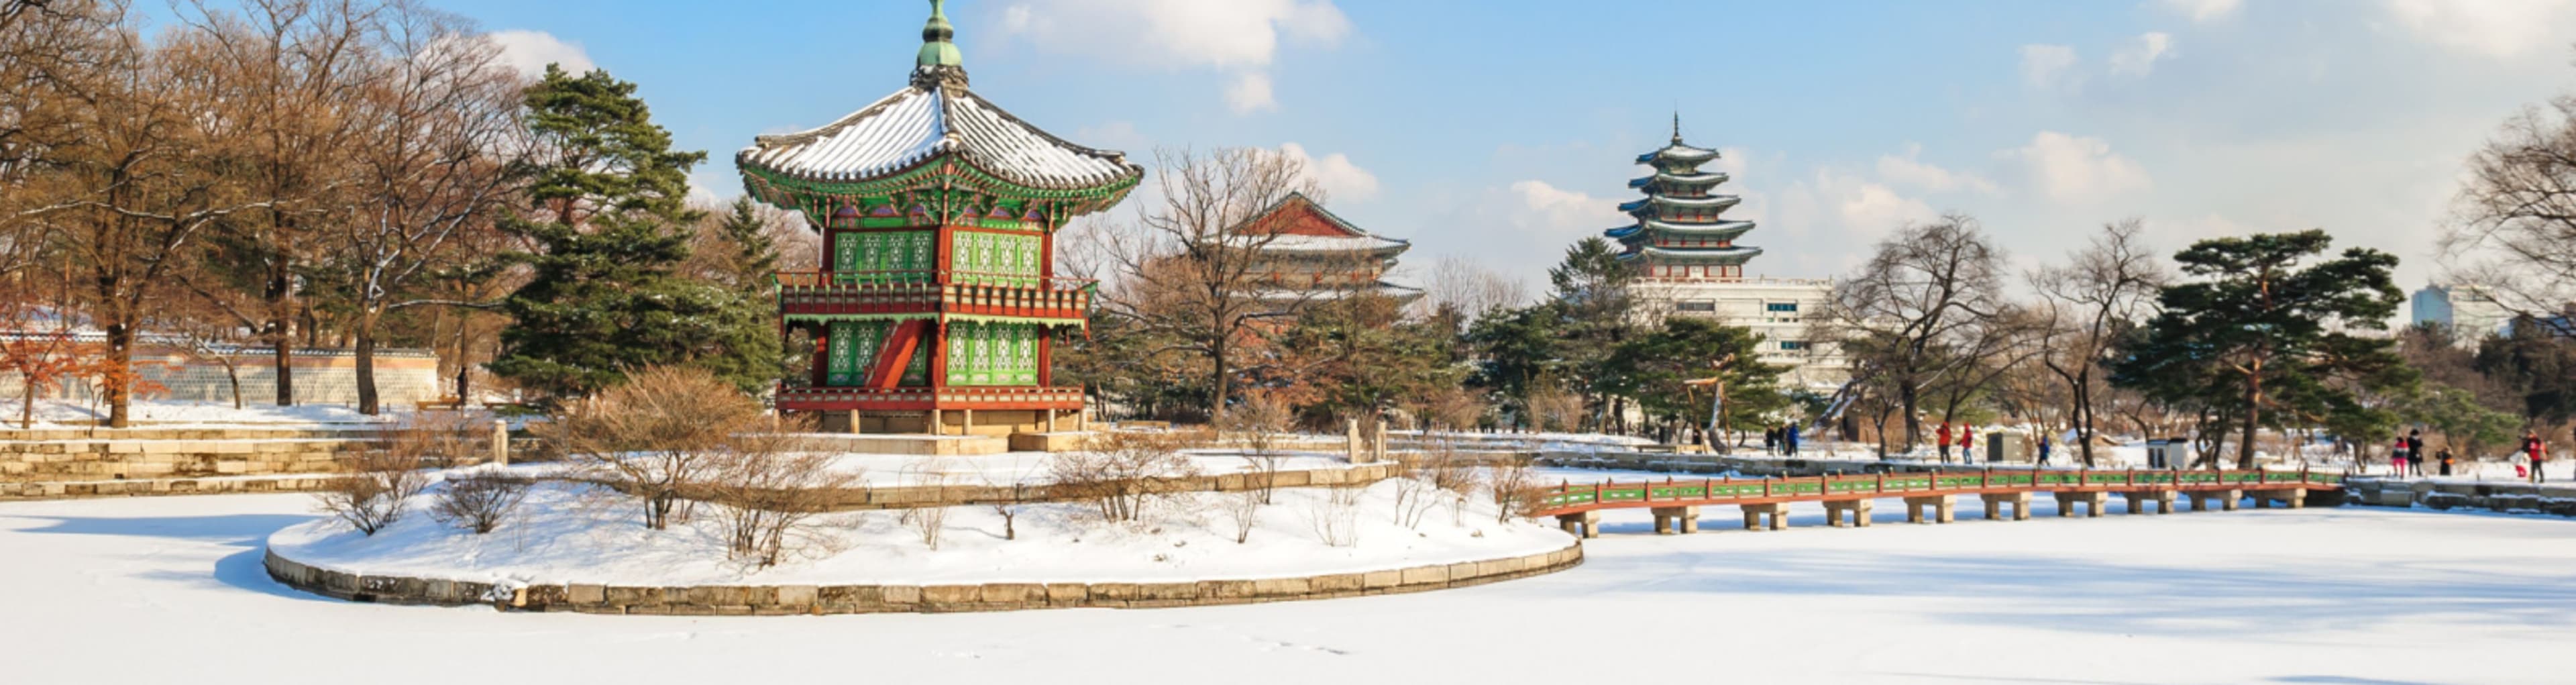 Seoul palace pavilion covered with snow